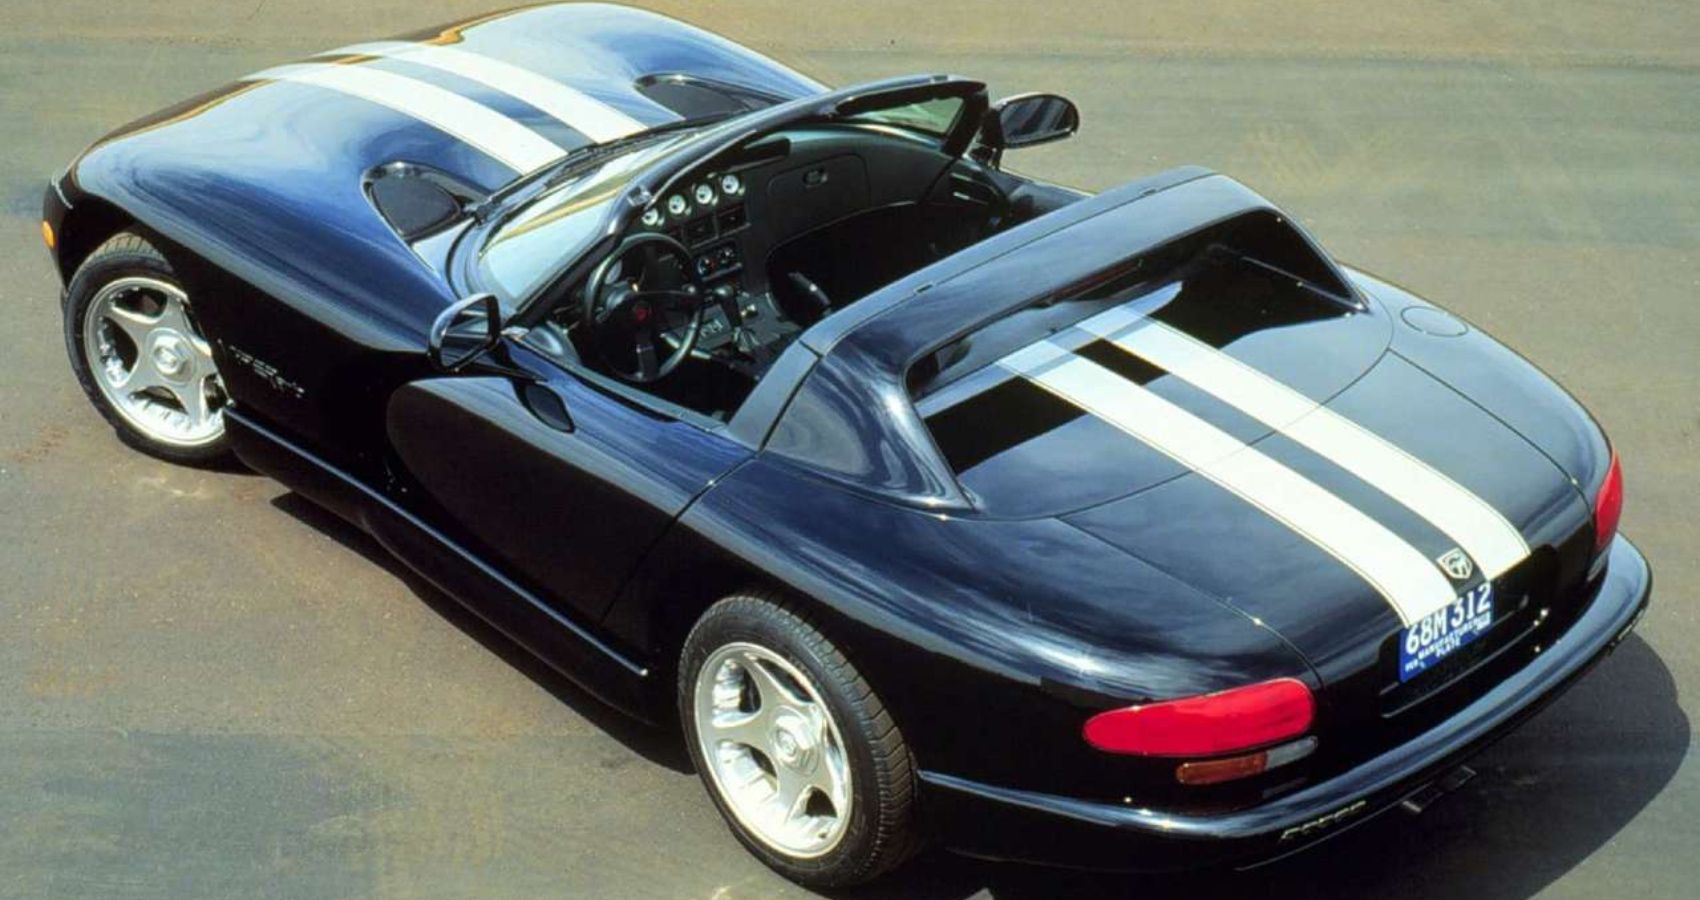 Here's Why the Dodge Viper RT/10 Is an Insane $50,000 Sports Car